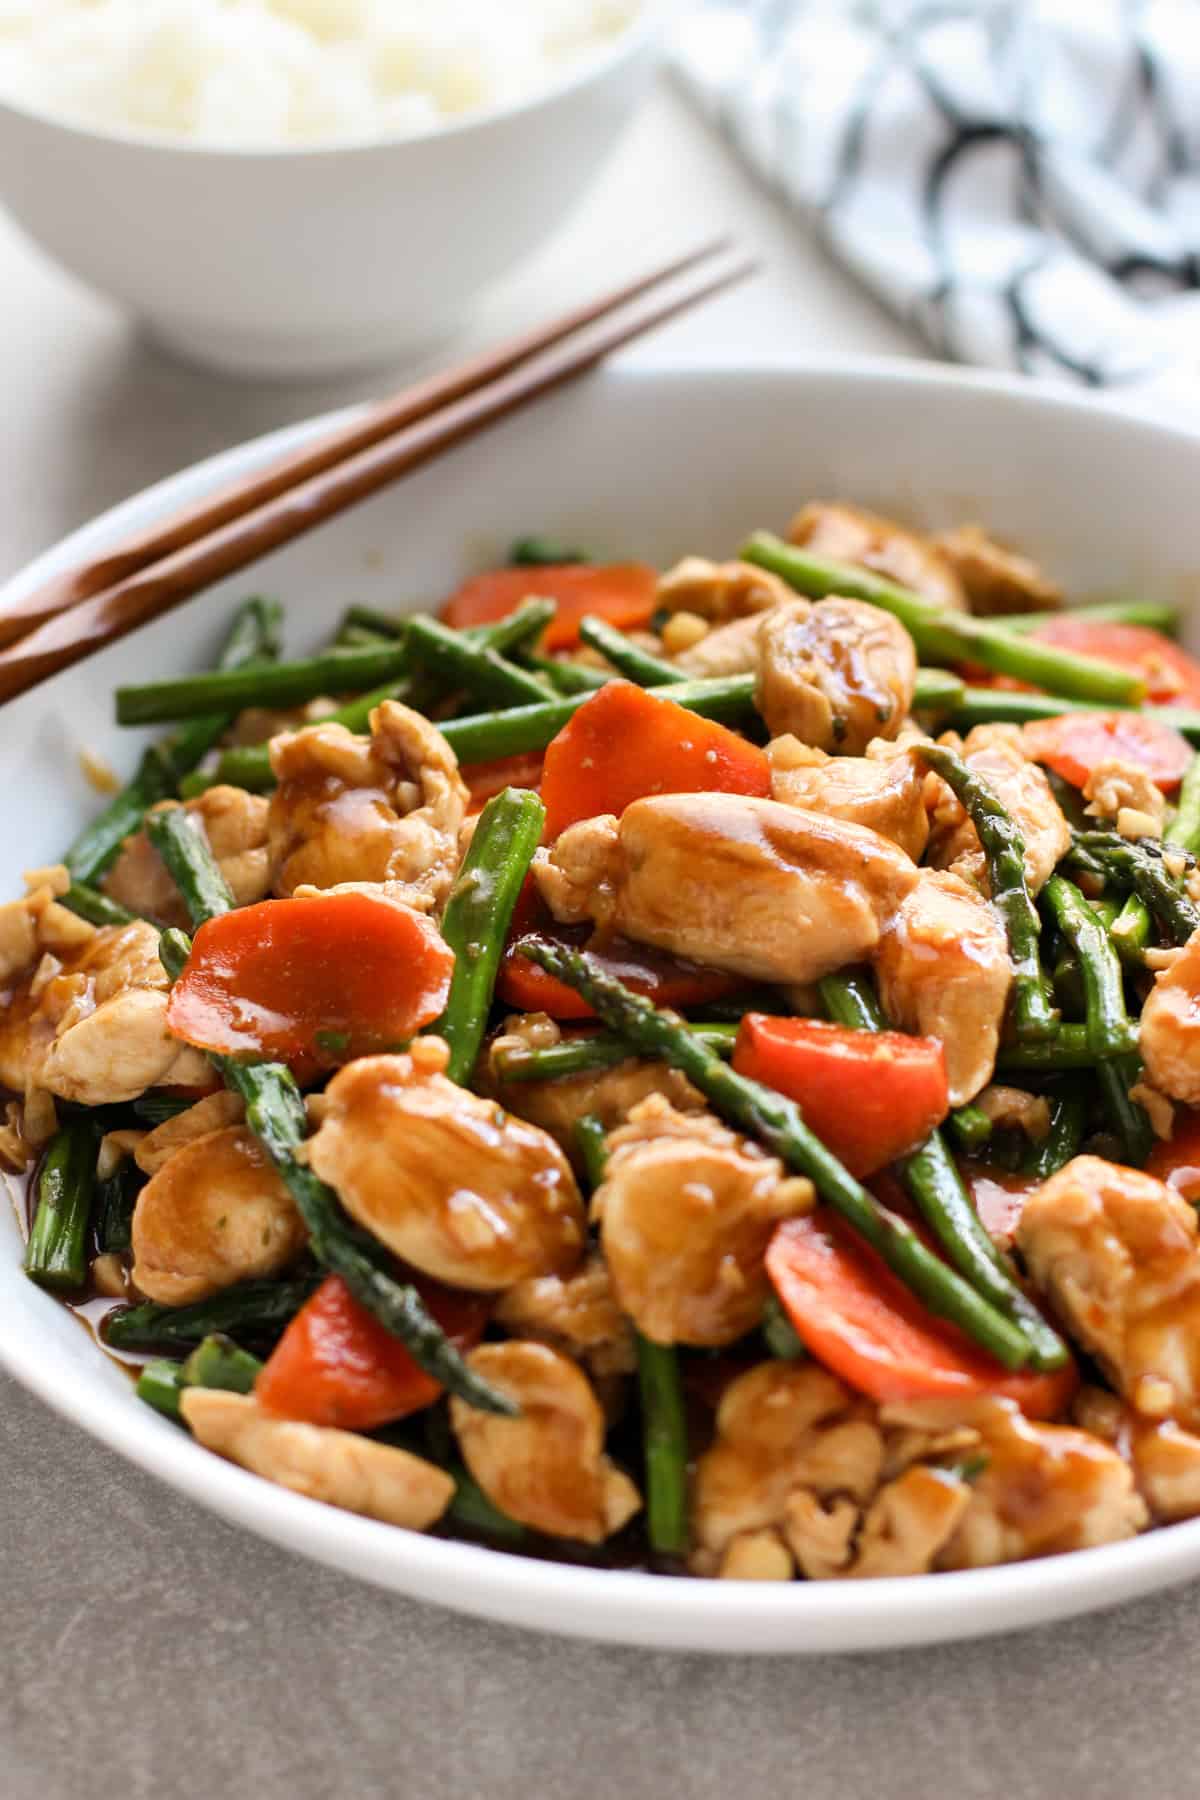 A bowl of Chicken and Asparagus Stir Fry